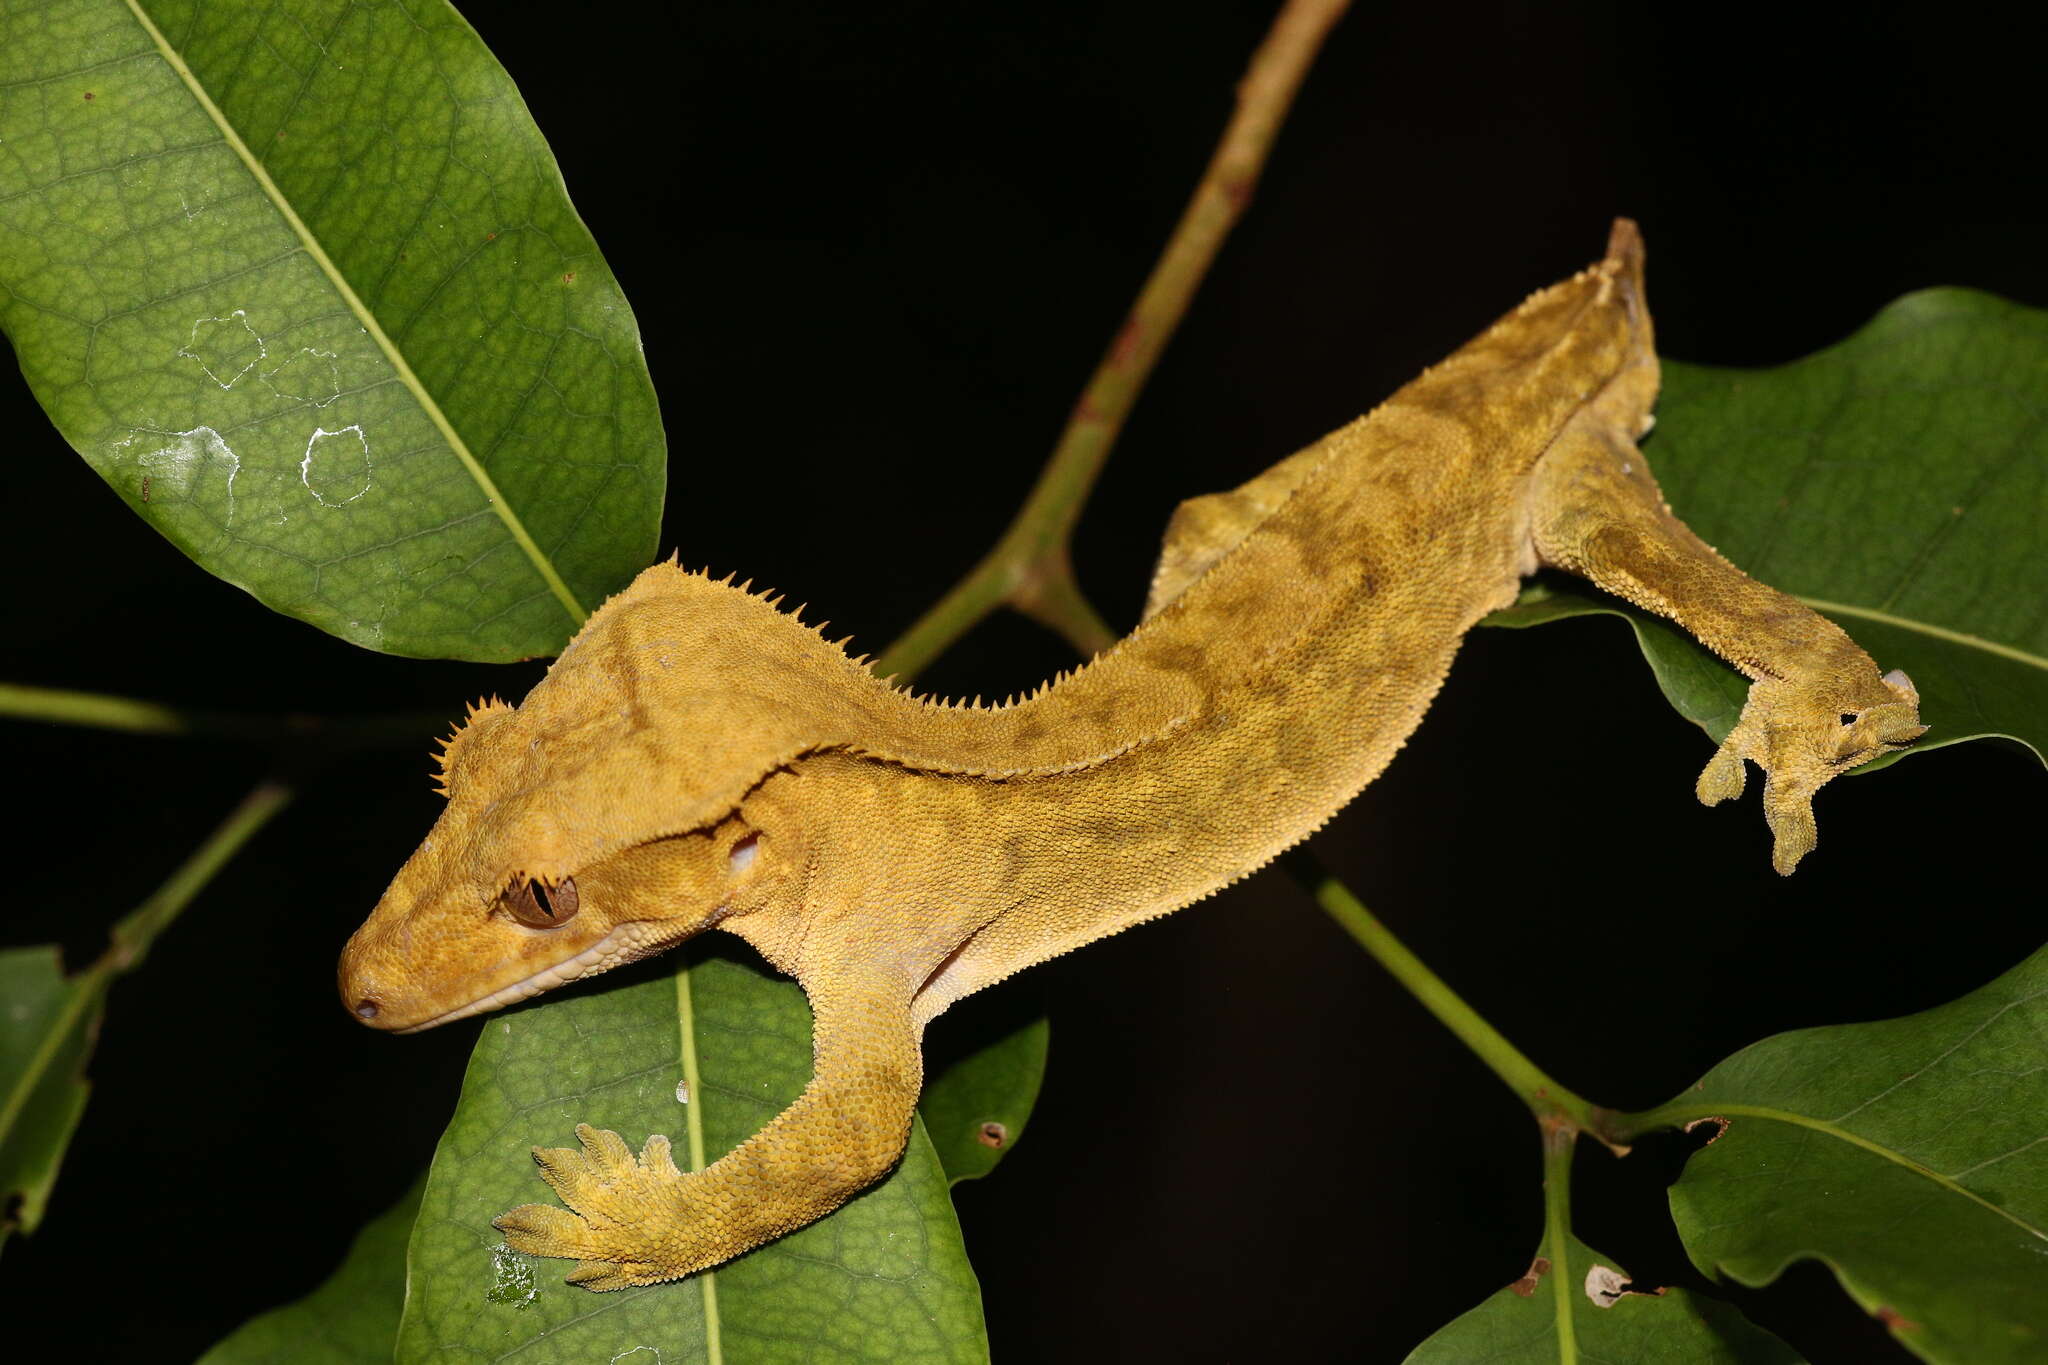 Image of Crested Gecko